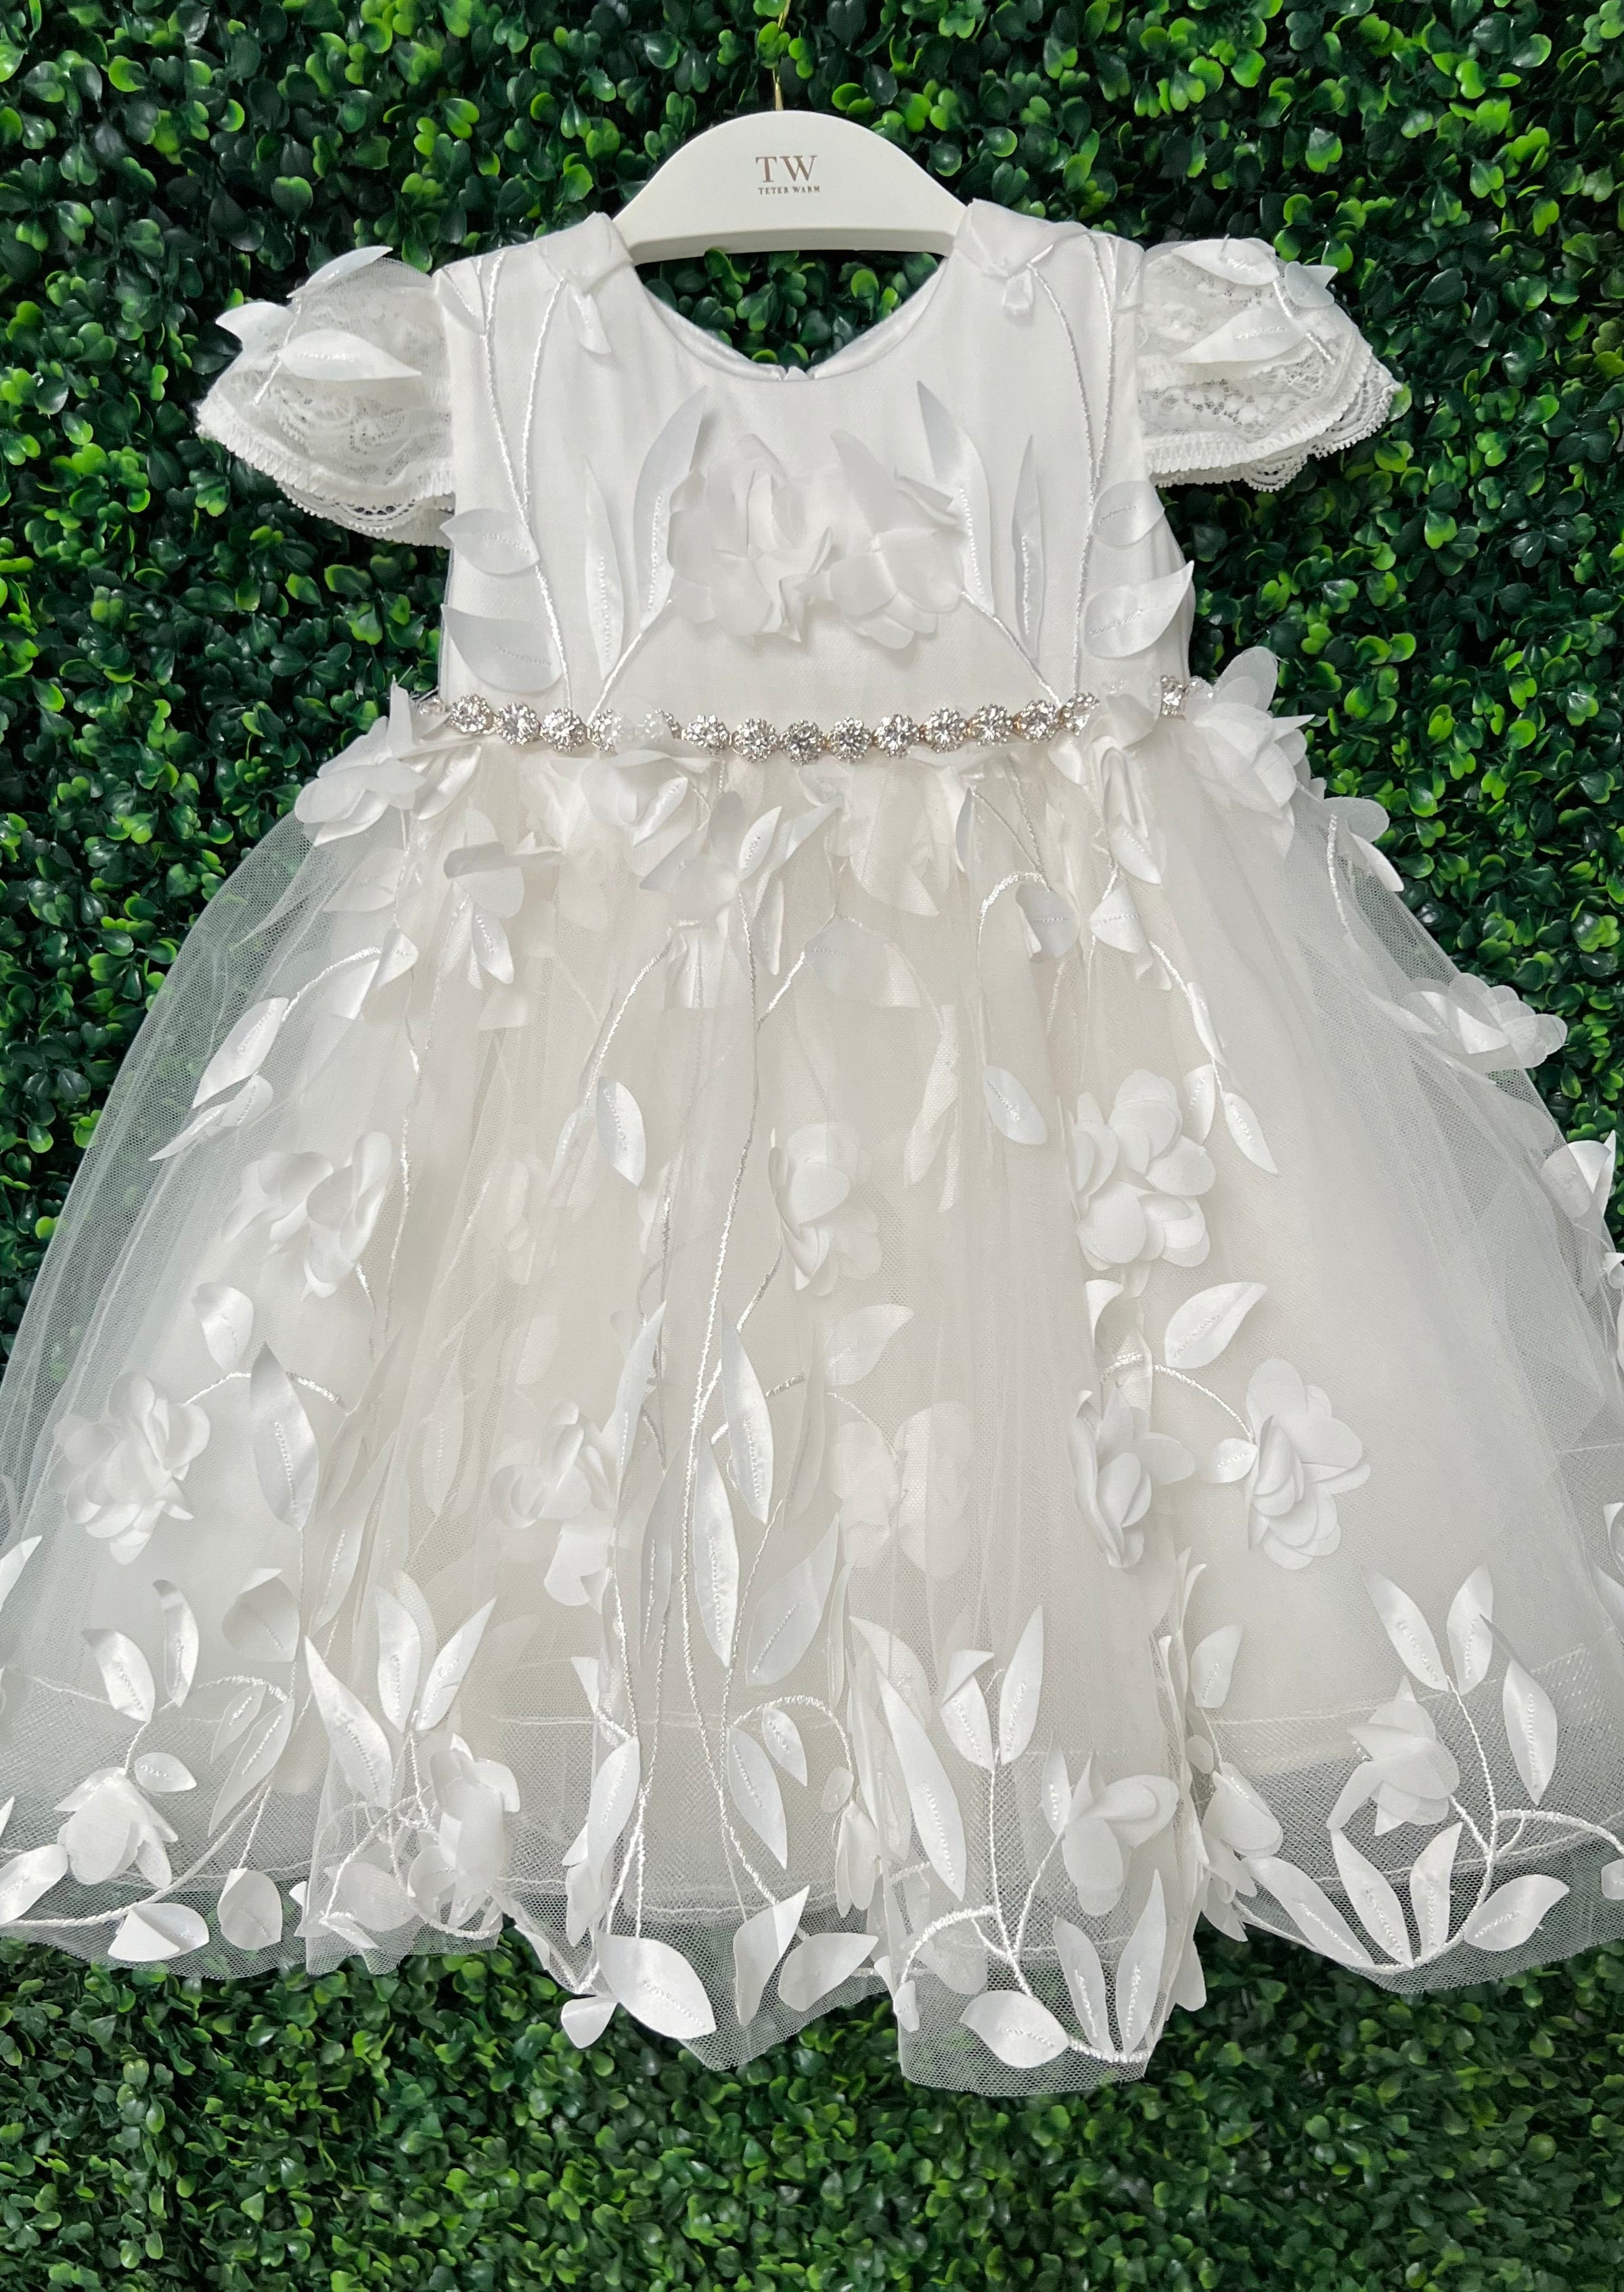 Christening Gowns For Girls, UK | Gowns For Girls